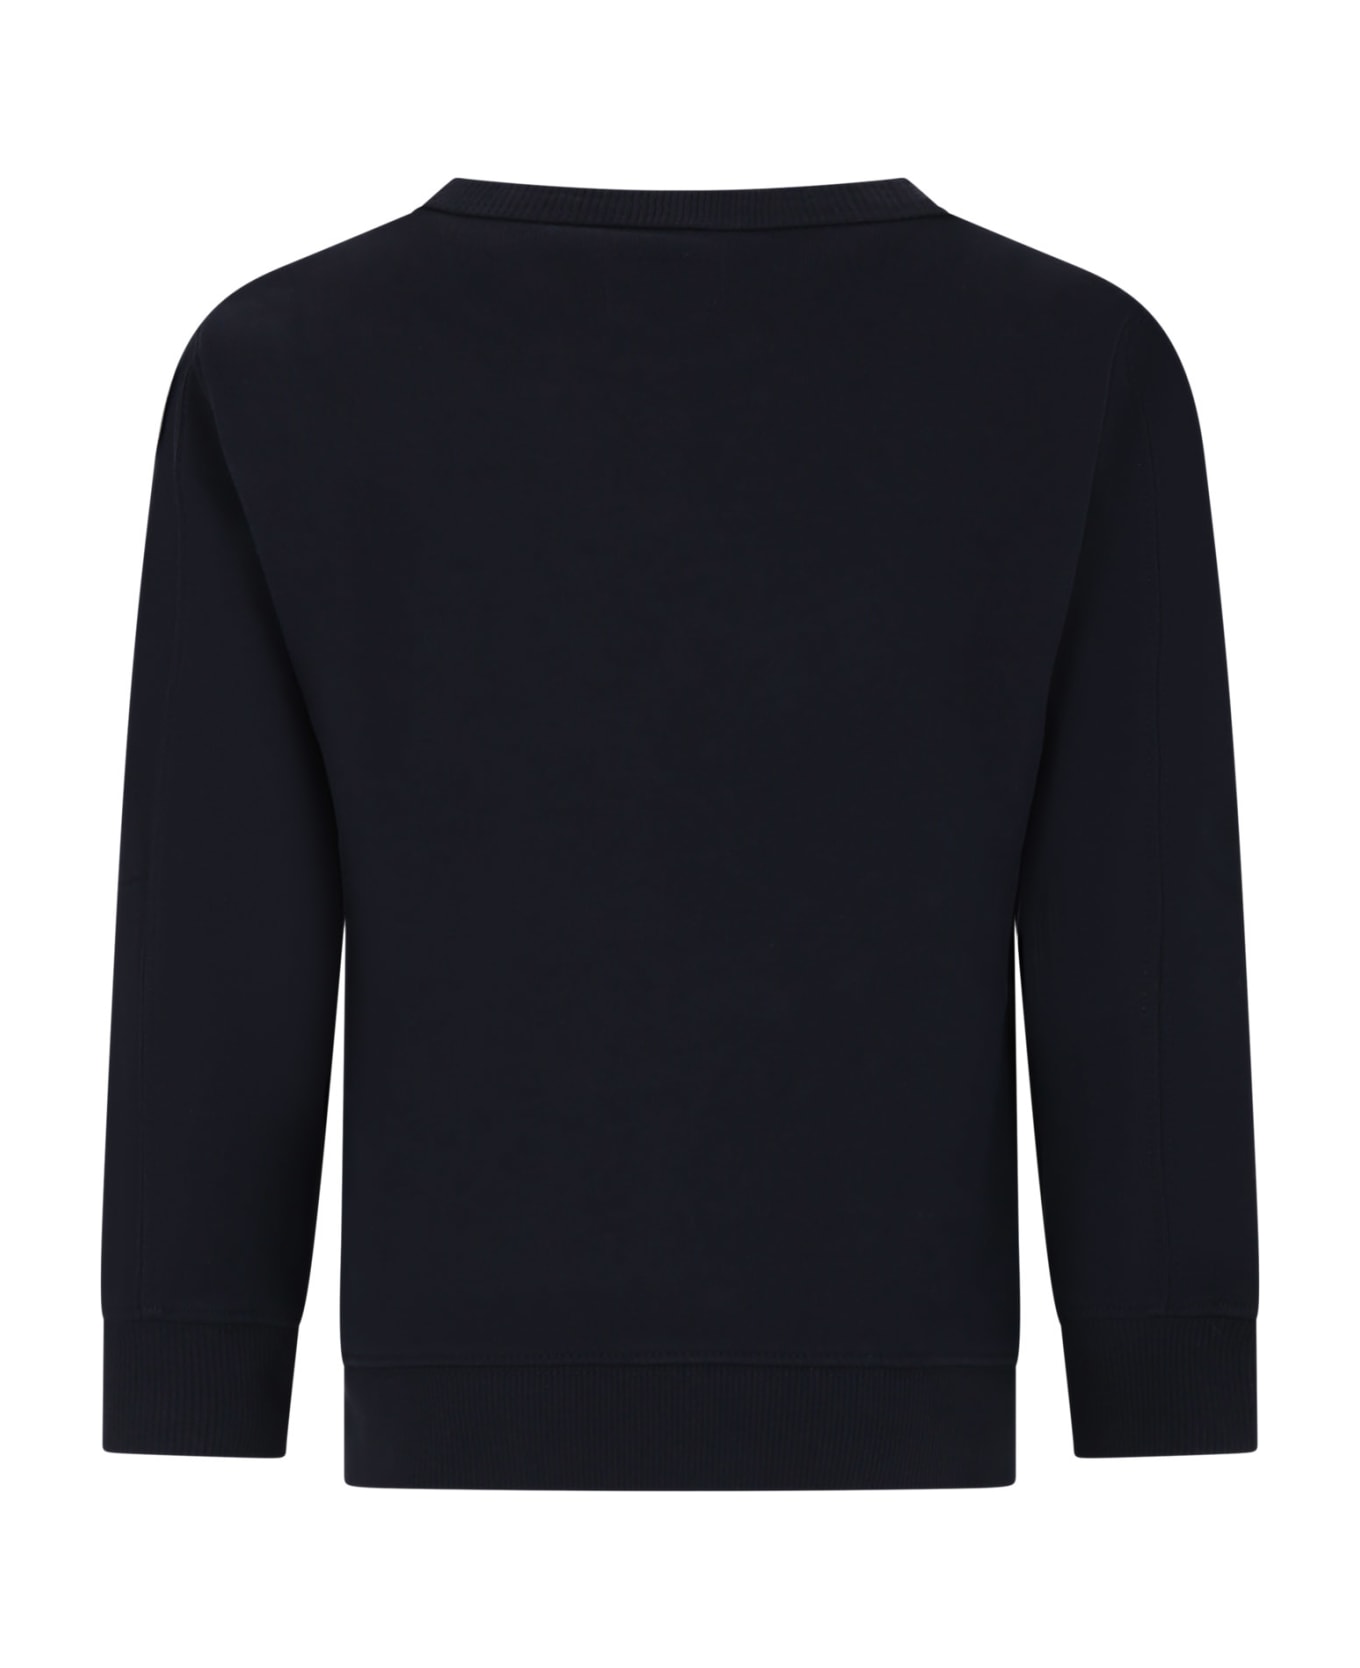 C.P. Company Blue Sweatshirt For Boy With C.p. Company Lens - Eclisse